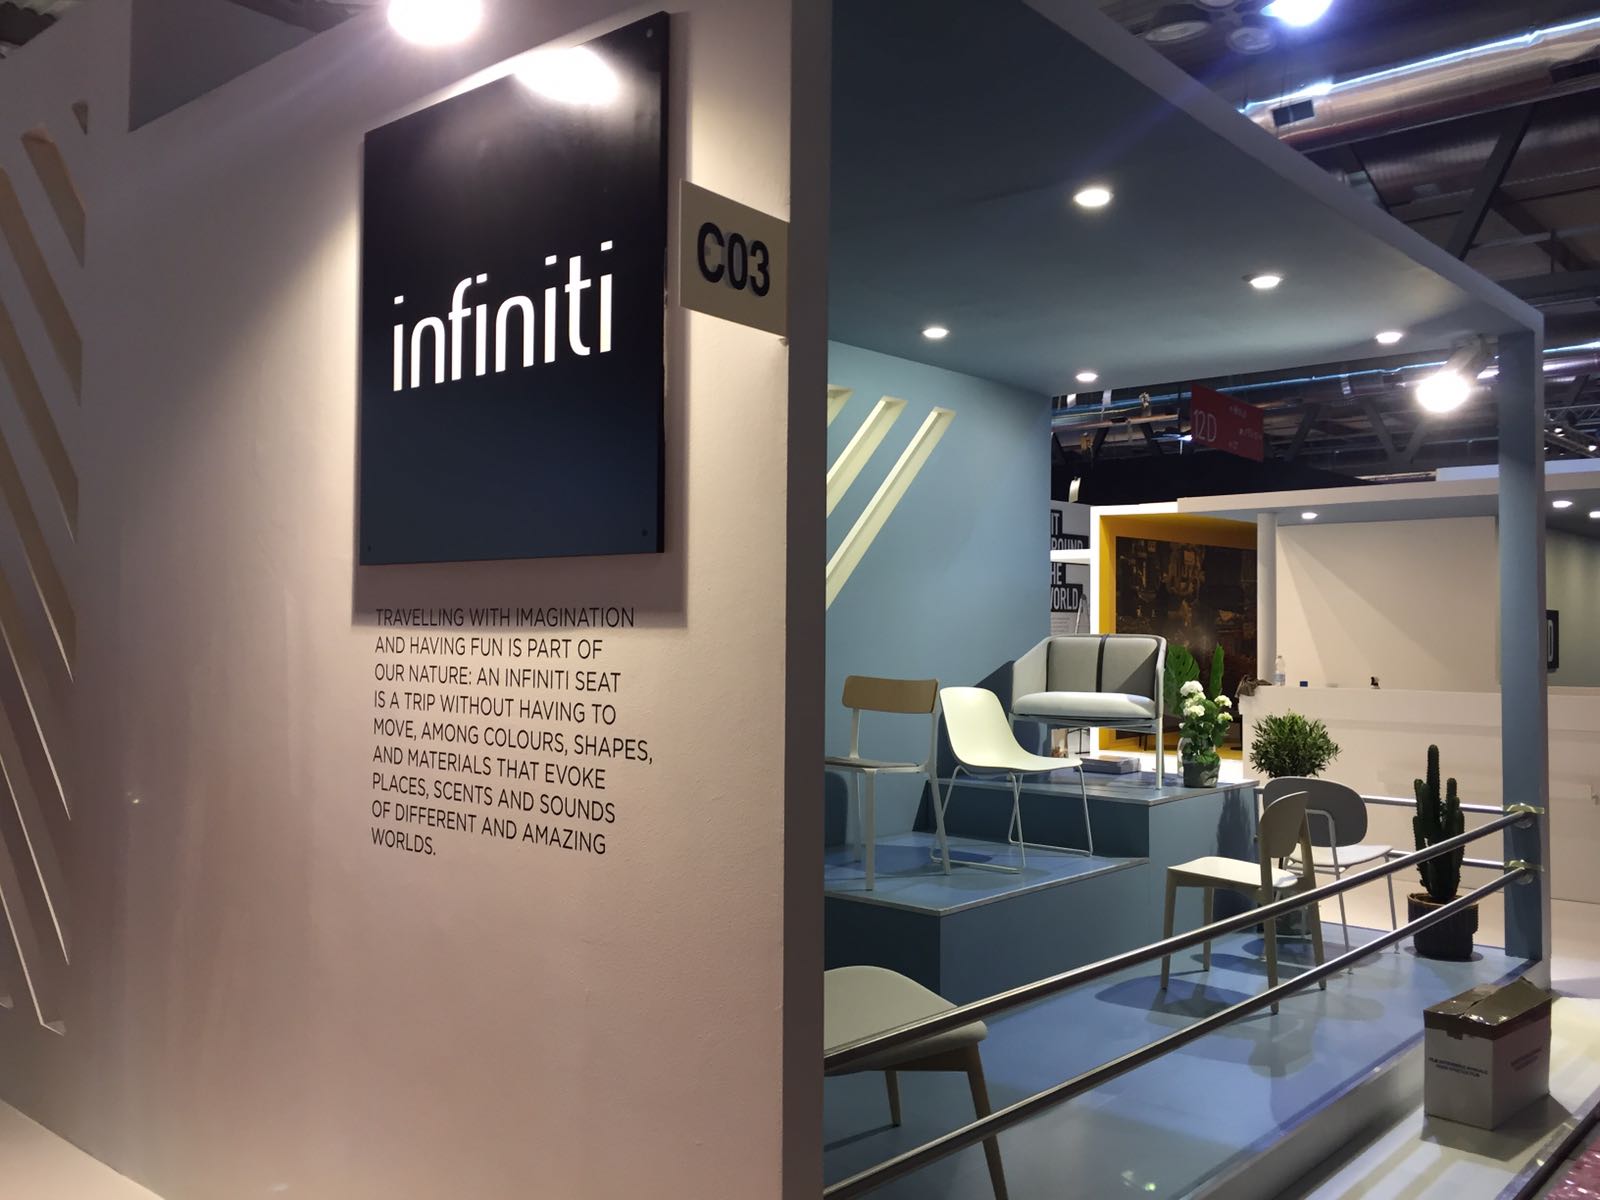 Color Trends Spotted at iSaloni 2017 | You can visit us at our website, www.essentialhome.eu and check our Pinterest @midcenturyblog to get more #MidCenturyModern inspiration. color trends Color Trends Spotted at iSaloni 2017 Color Trends Spotted at iSaloni 2017